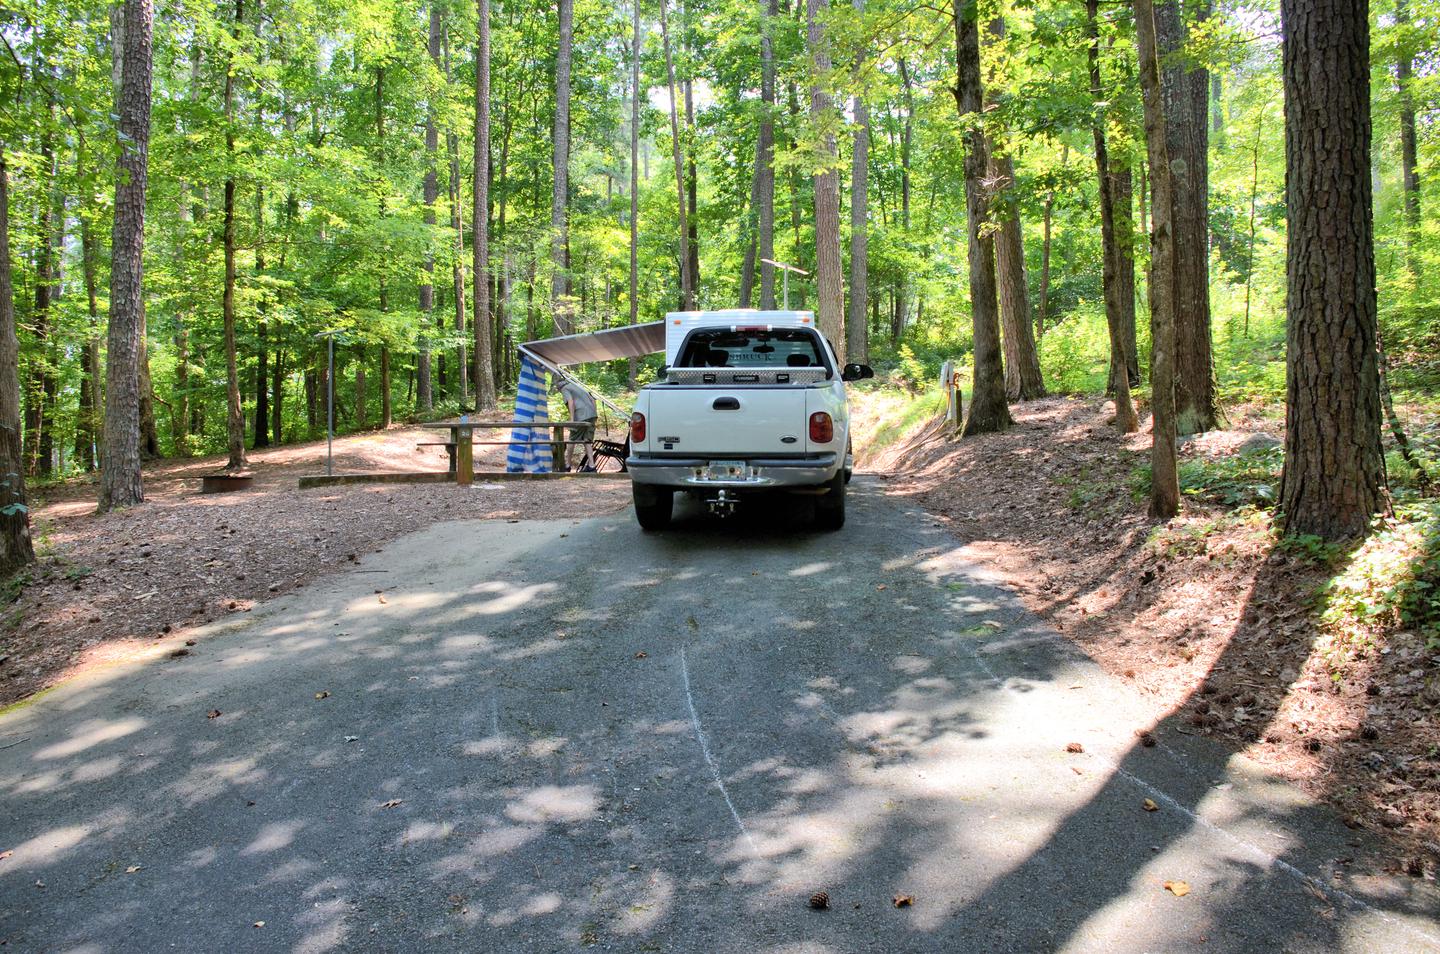 Driveway slopeMcKaskey Creek Campground, campsite 25.  Very steep slope on driveway, notice drag marks.